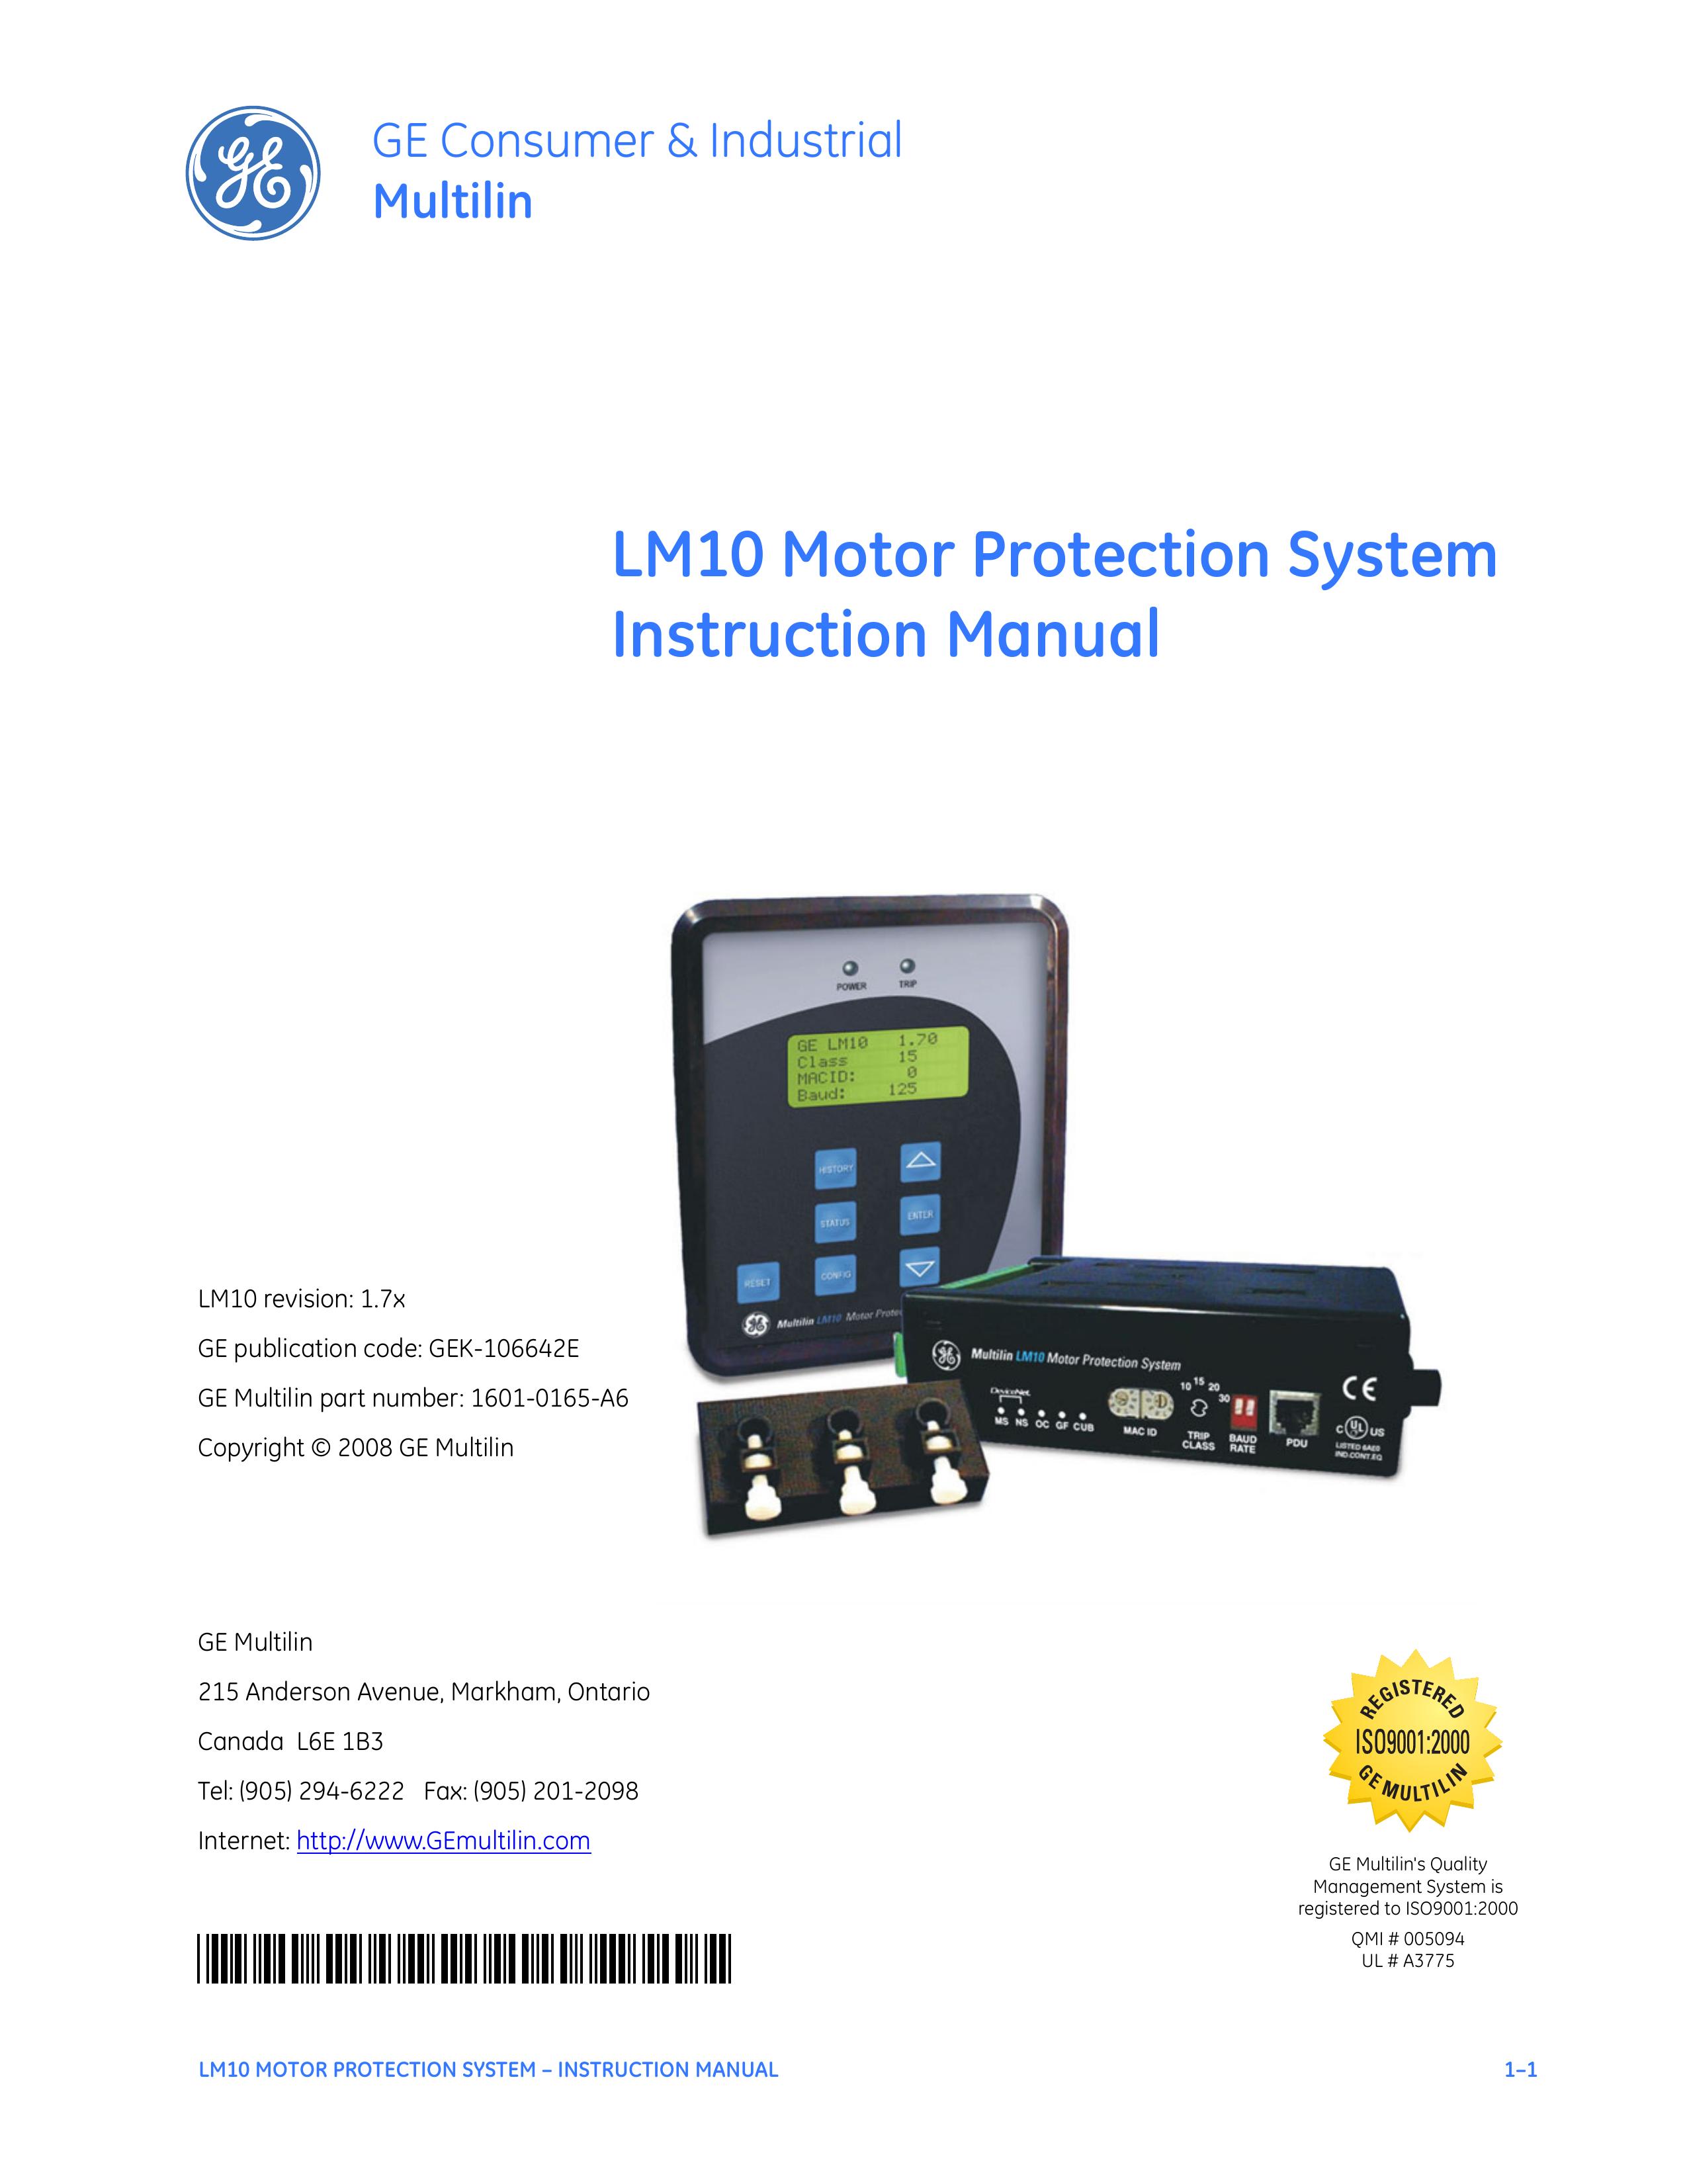 GE Motor Protection System Outboard Motor User Manual